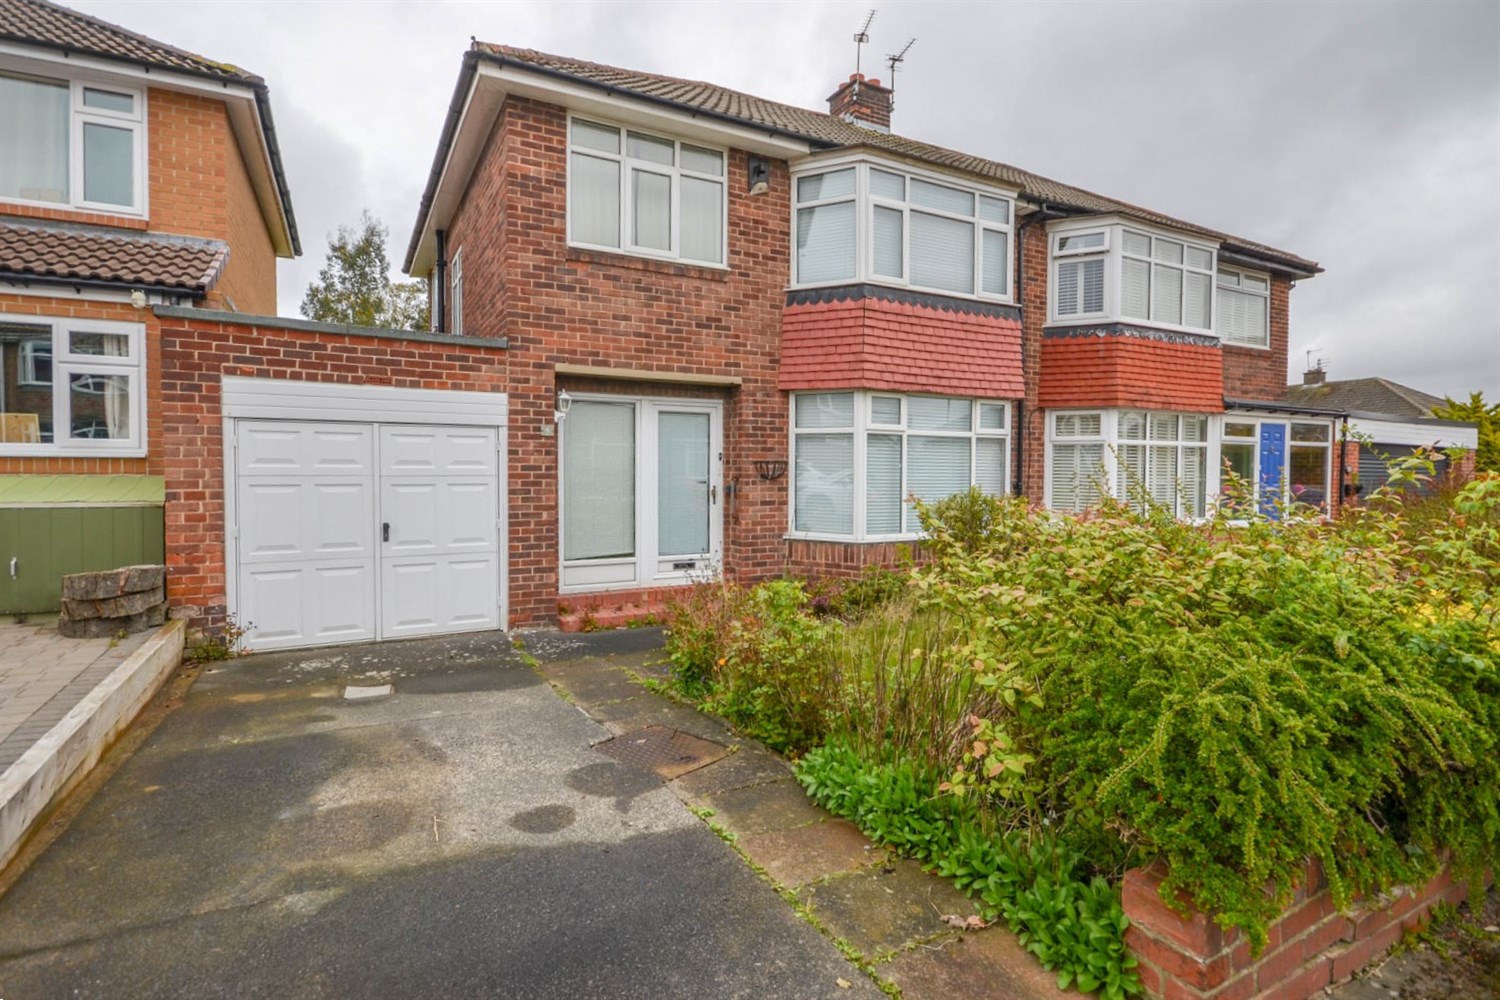 3 bed semi-detached house for sale in Hardwick Place, Gosforth - Property Image 1